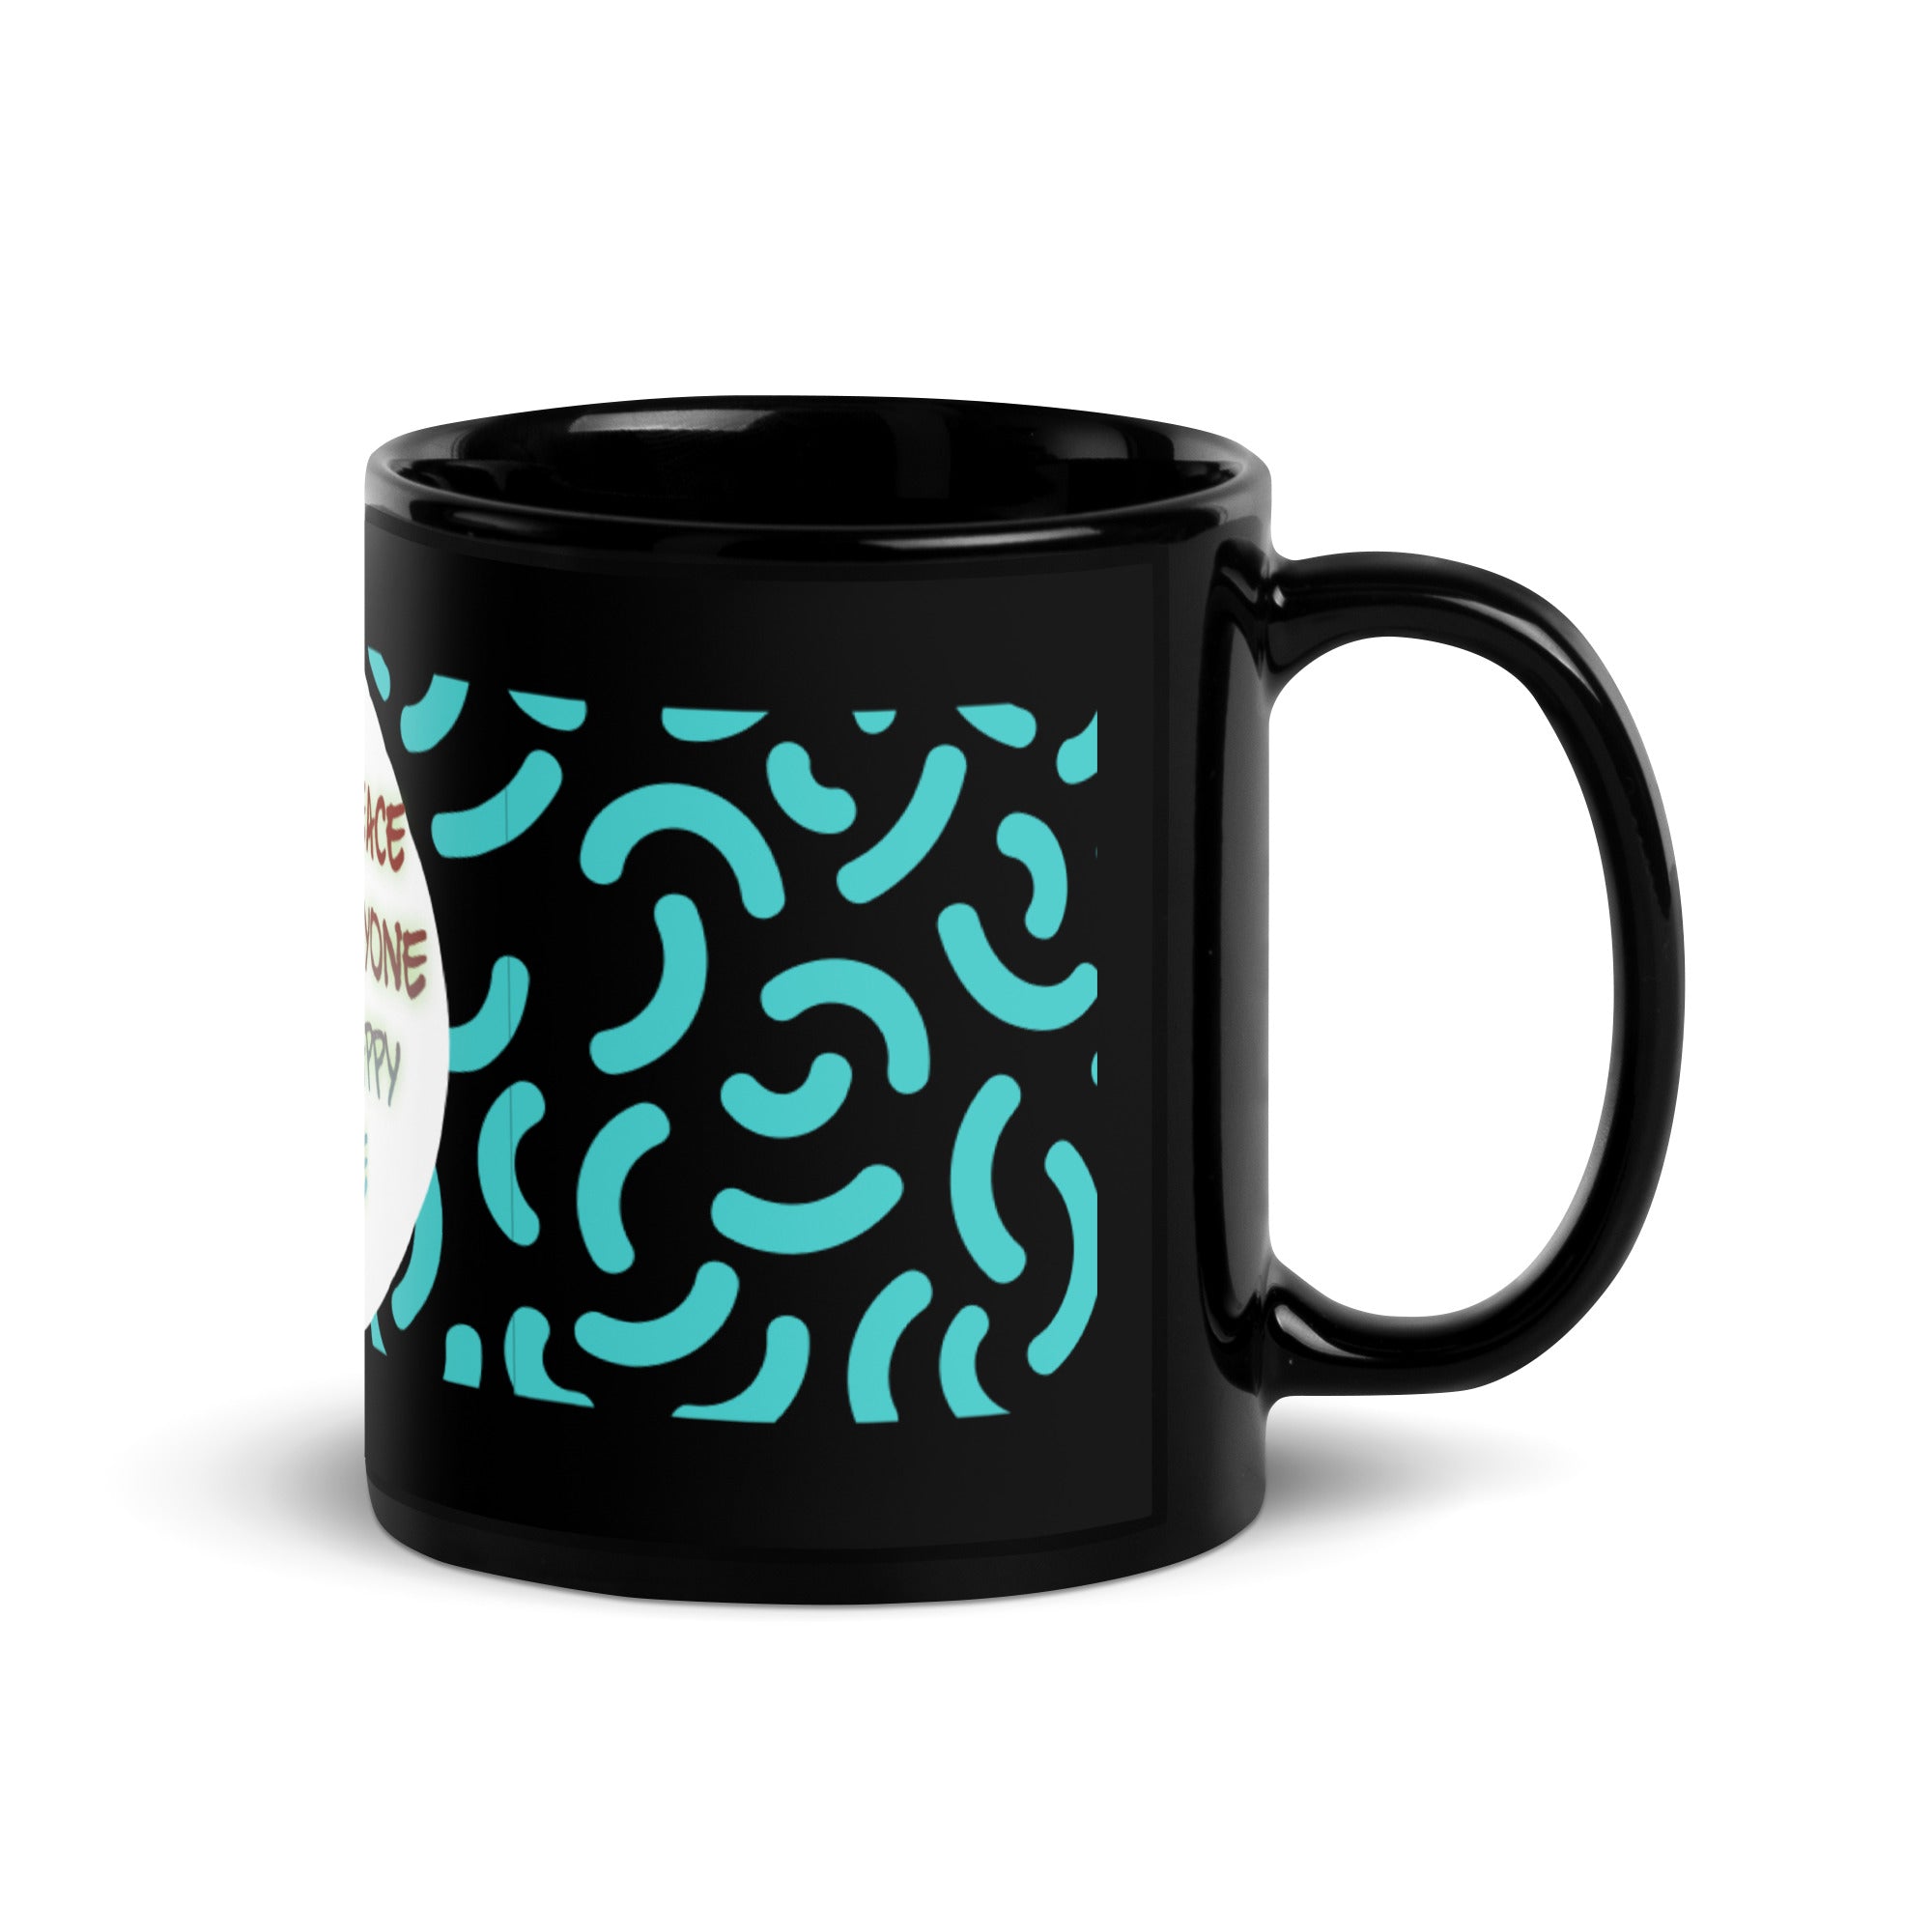 GloWell Designs - Black Glossy Mug - Motivational Quote - Live At Peace With Everyone - GloWell Designs